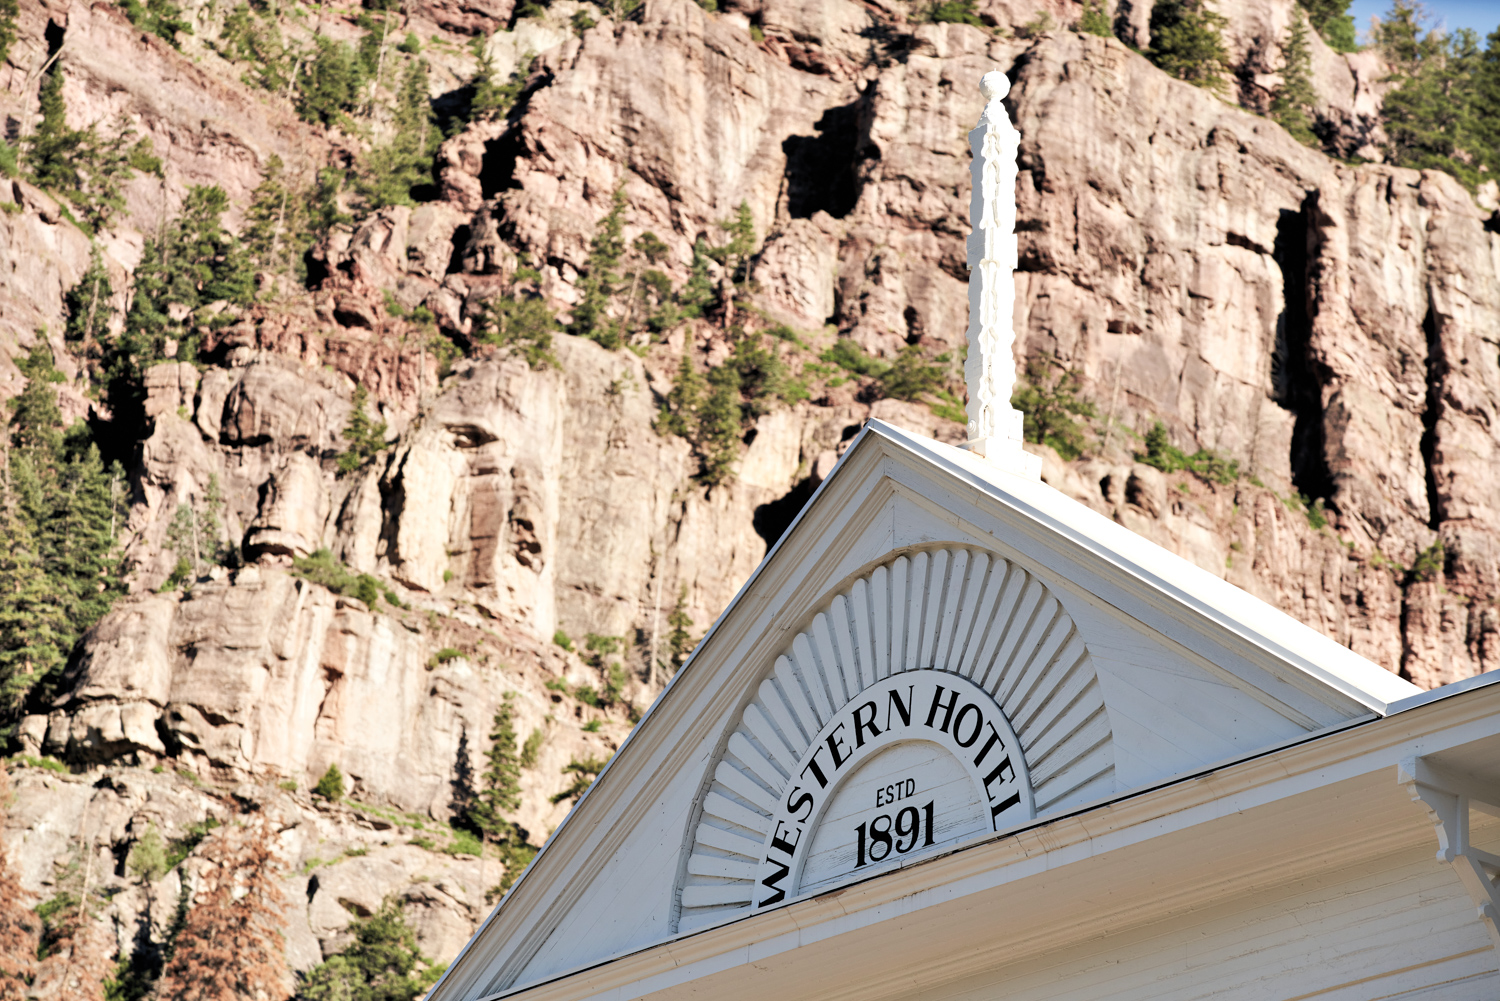 Detail shot of the exterior facade of the Western hotel's historic building with the side of a mountain as backdrop